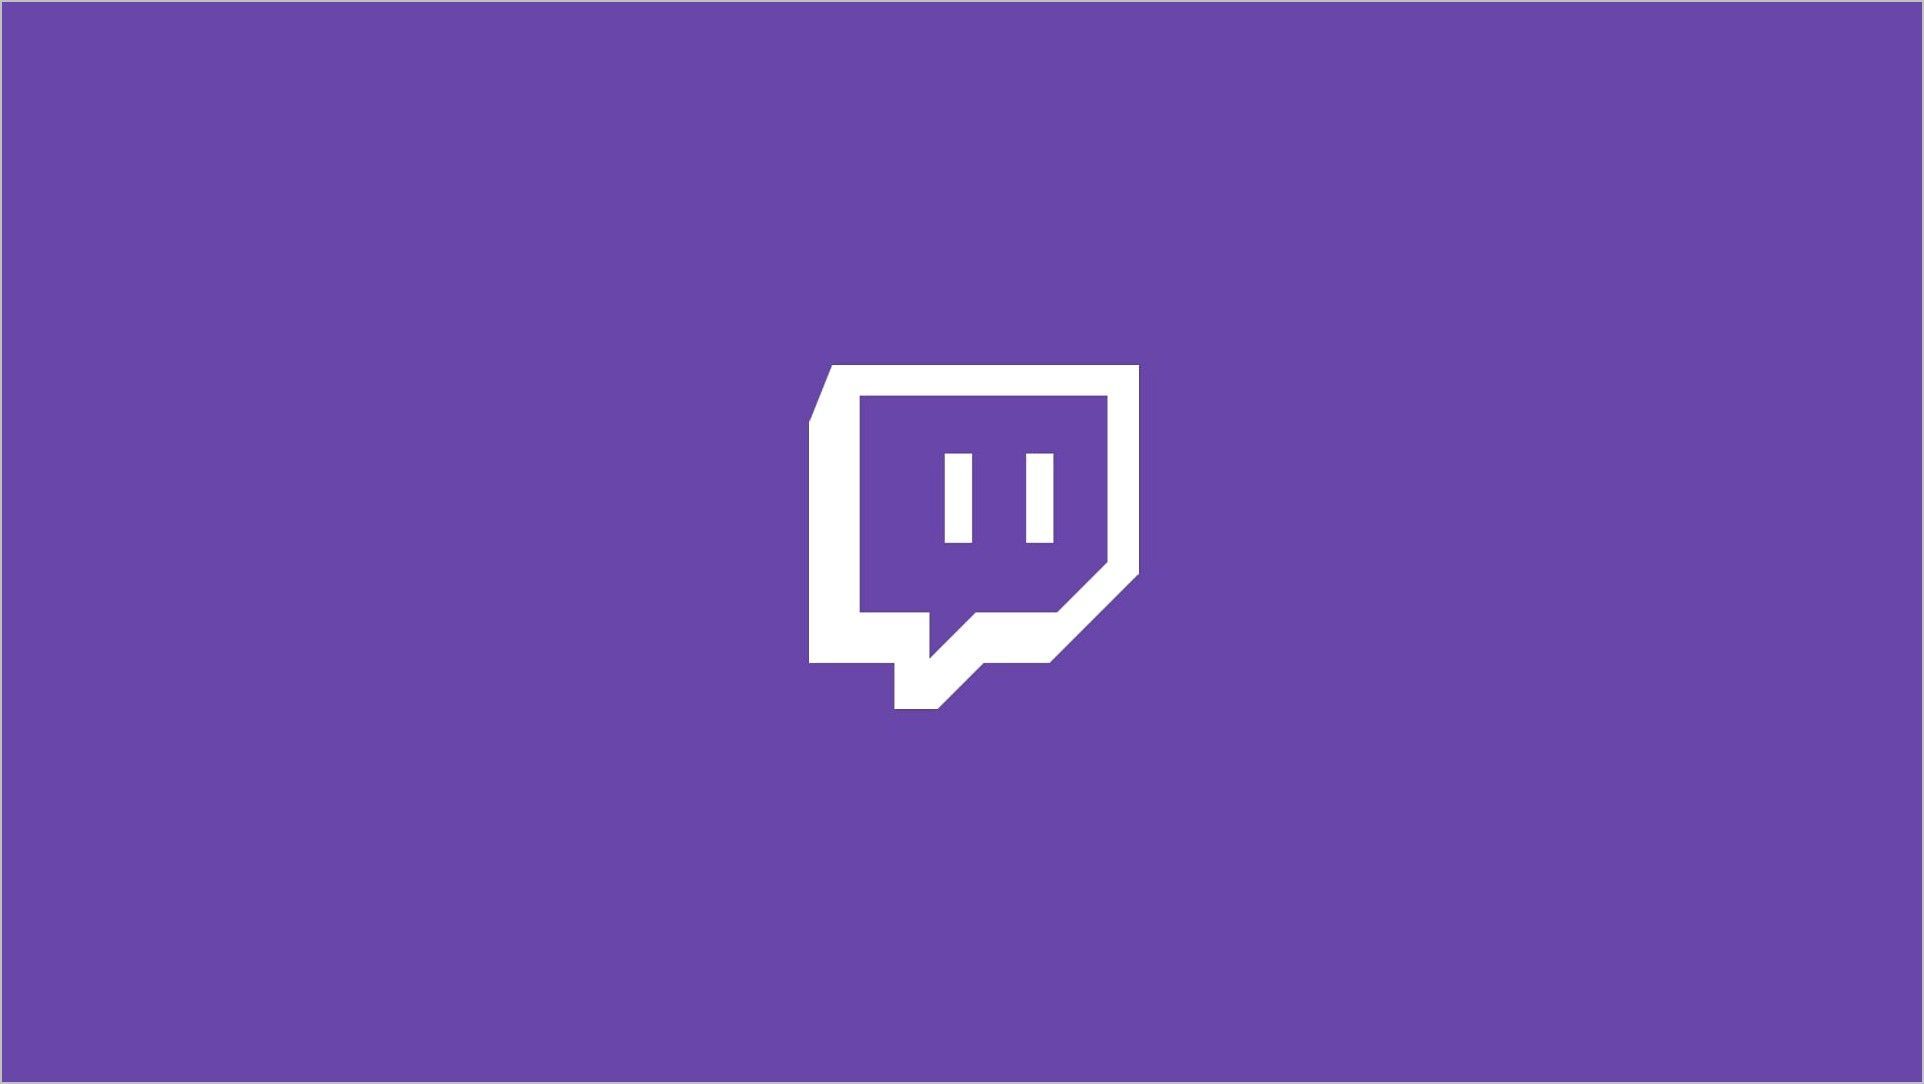 How to Make a Twitch Profile Picture for Free